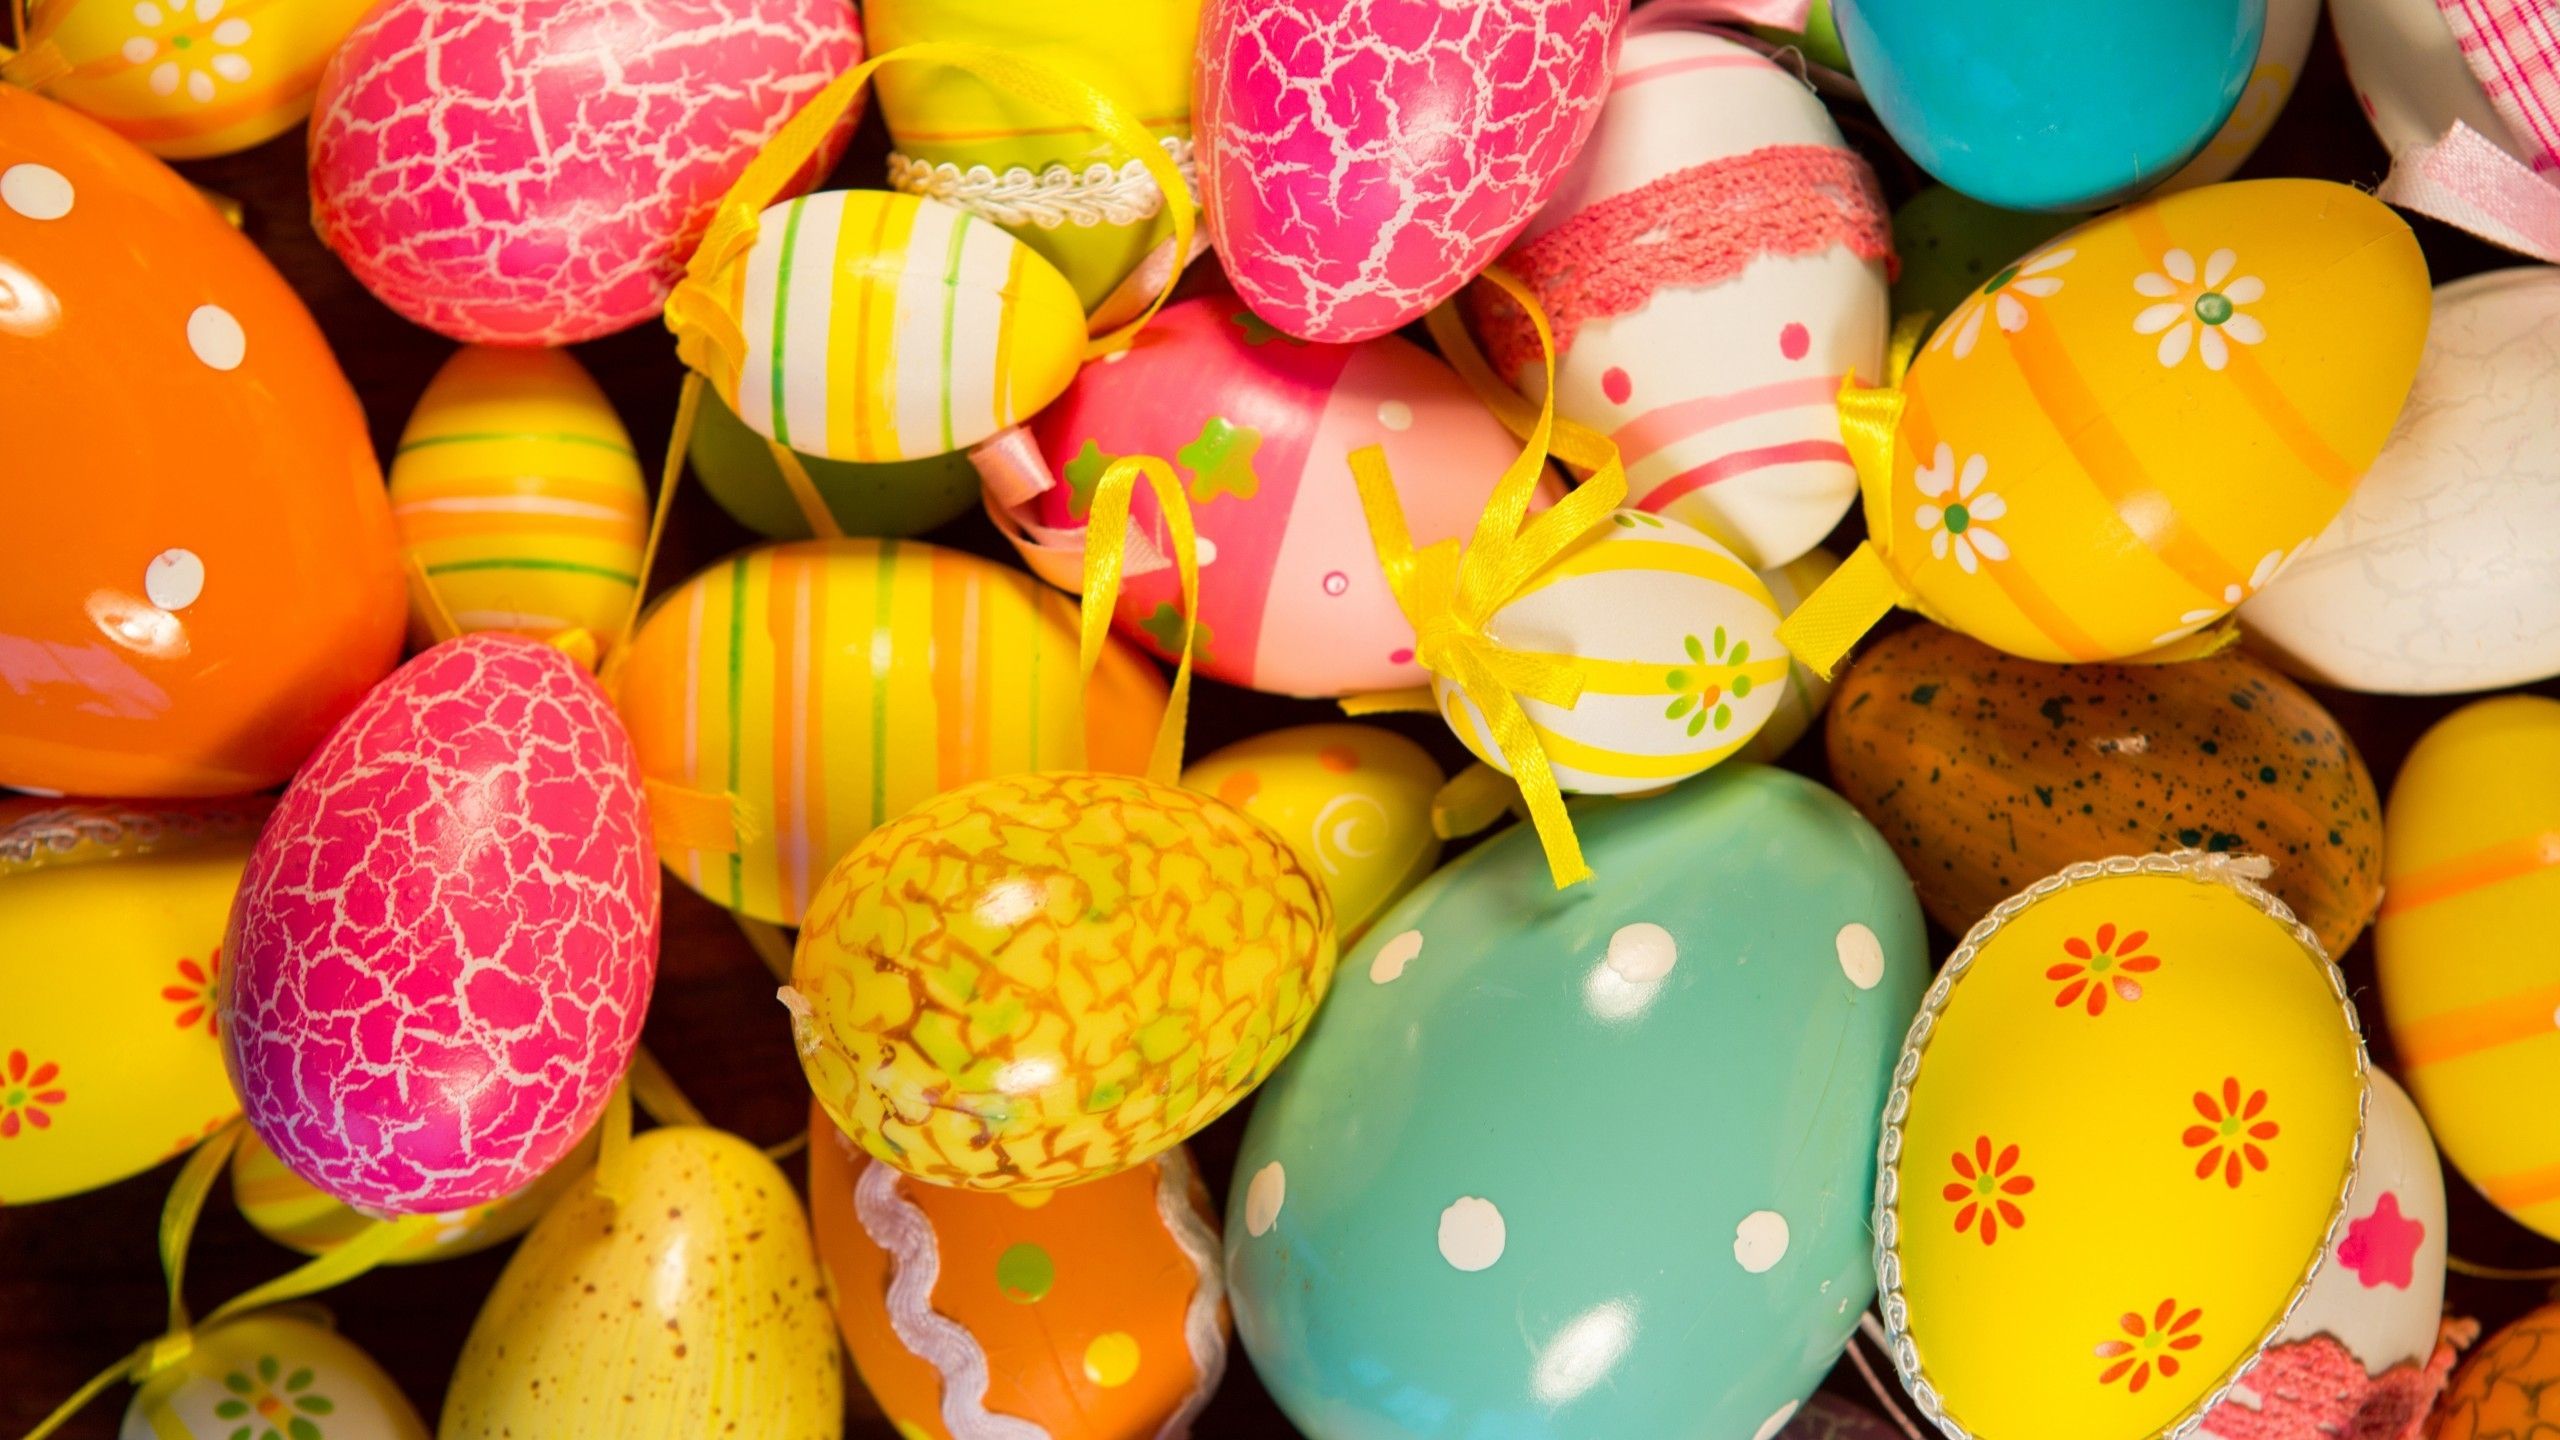 decoration, eggs, pink, holiday, white, Easter, yellow, blue, orange wallpaper